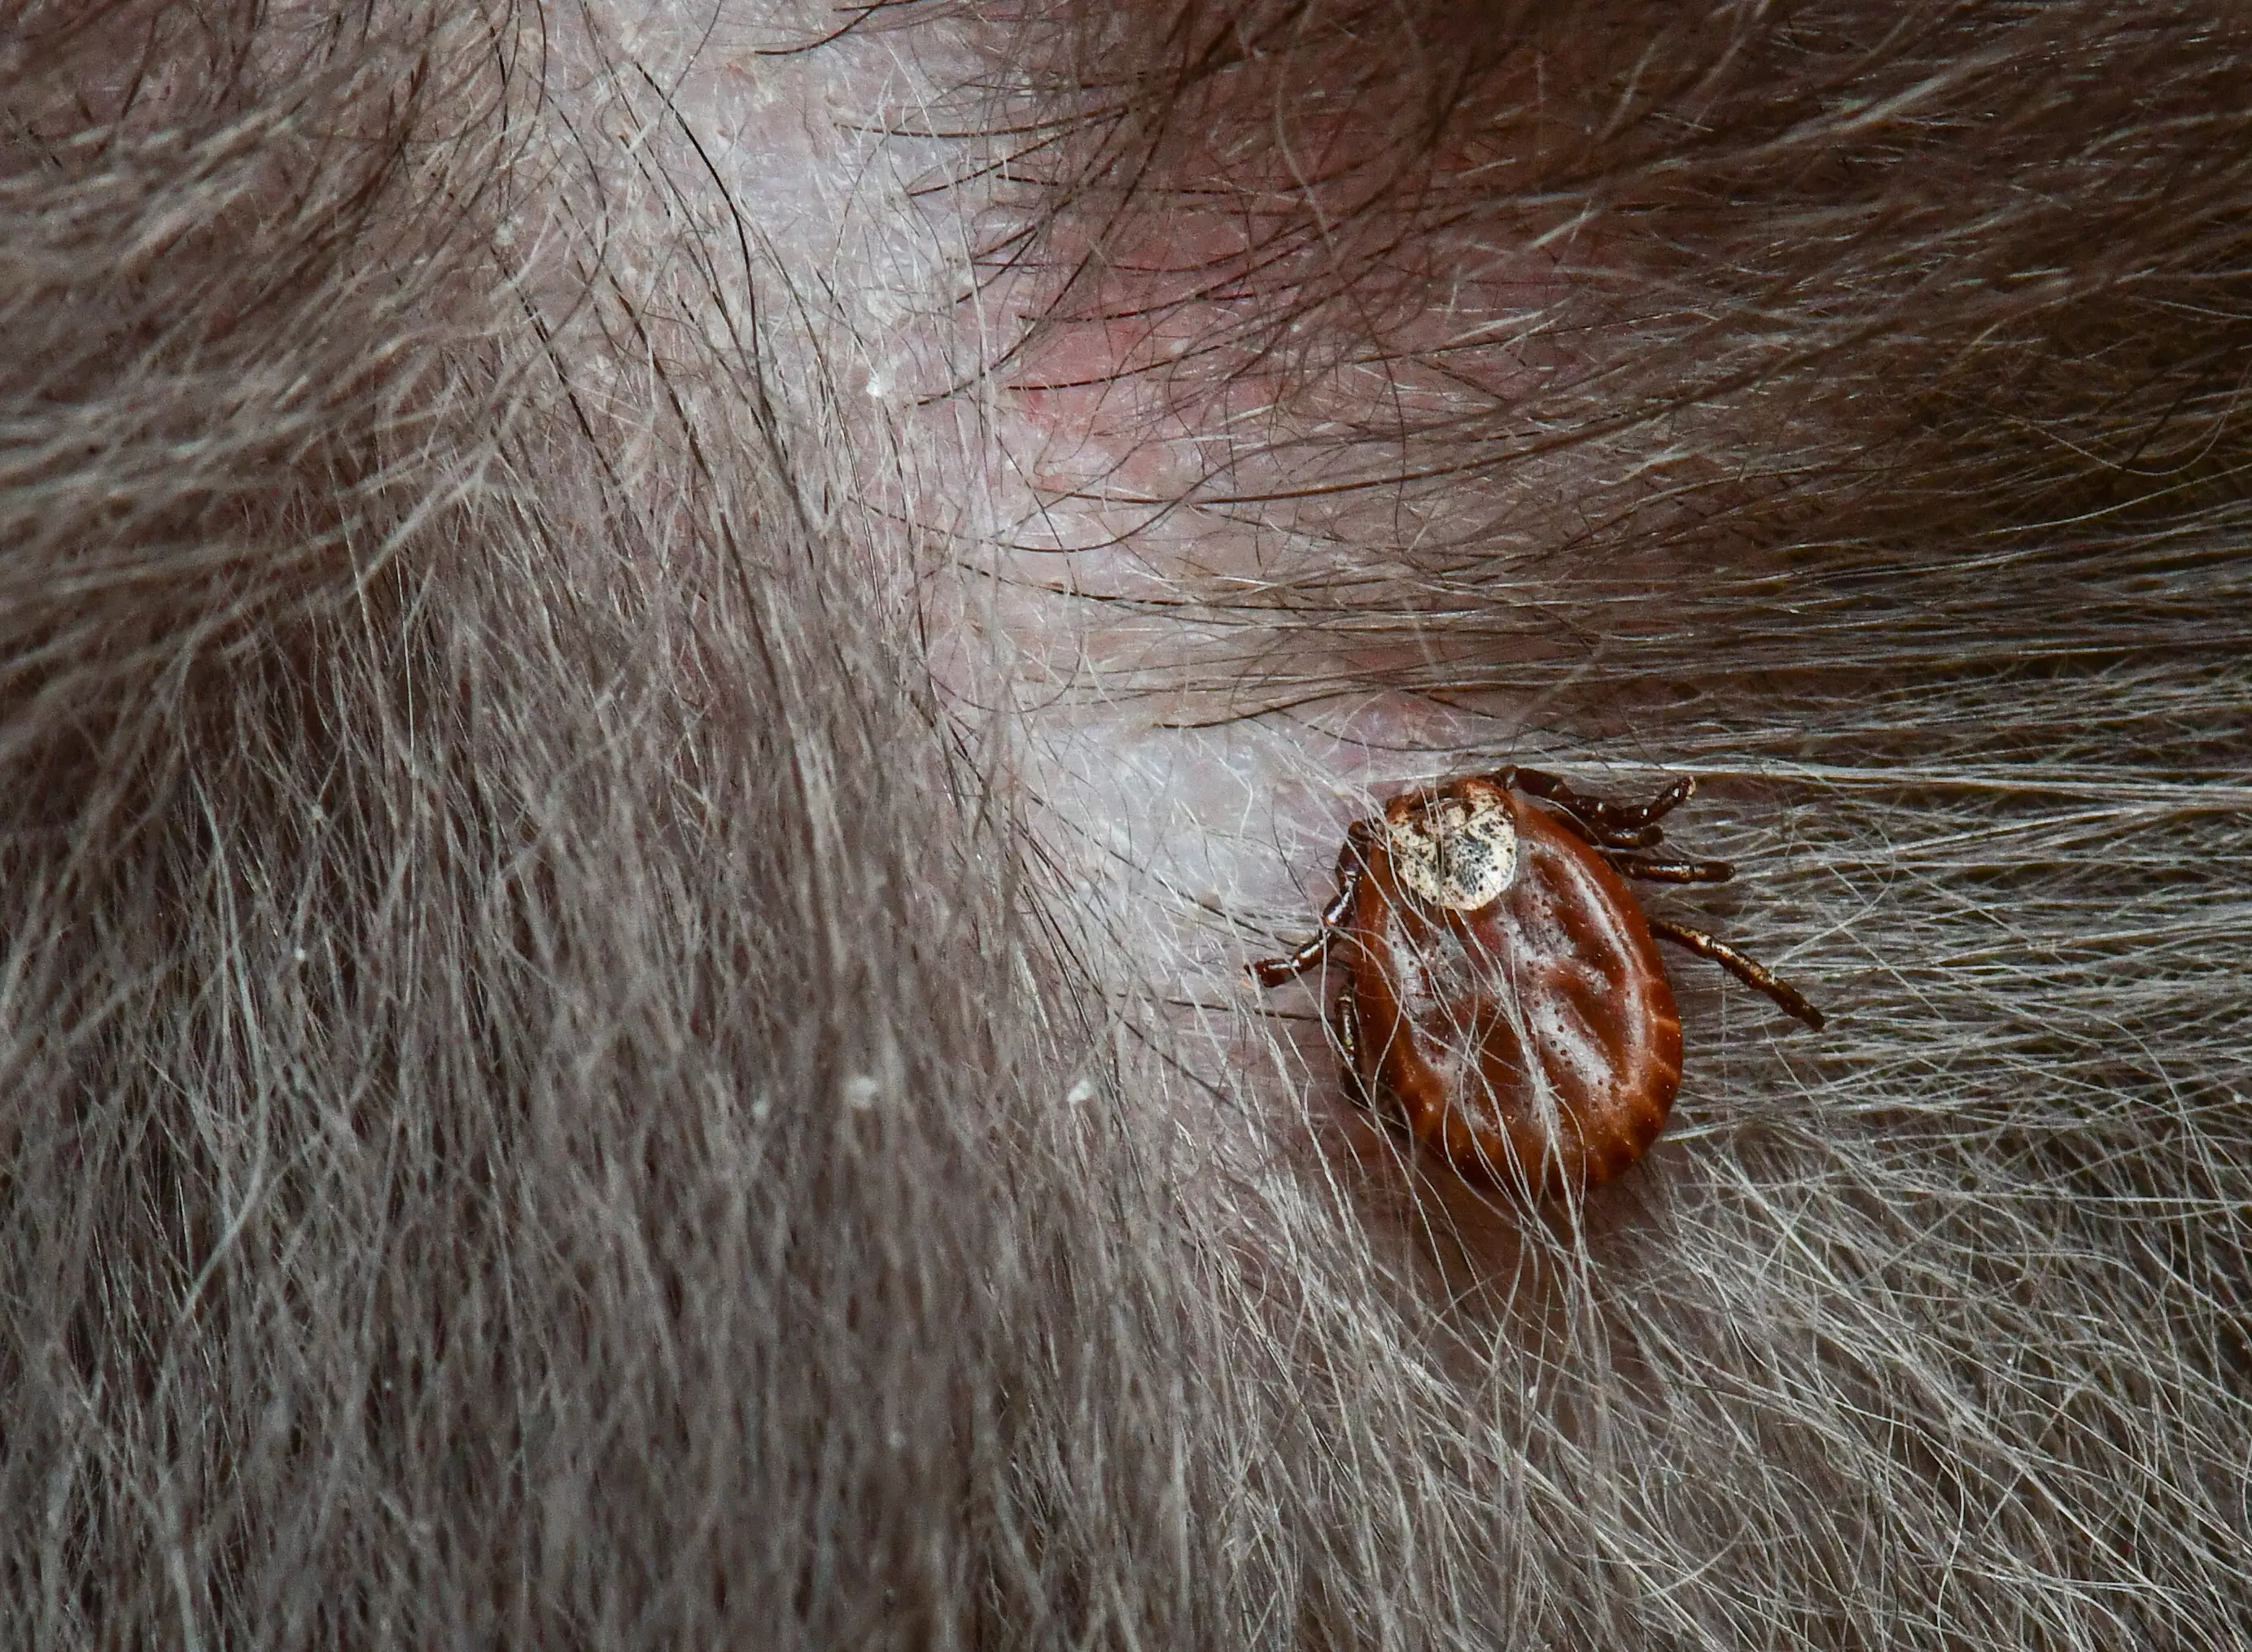 The disease is caused by tick bites.